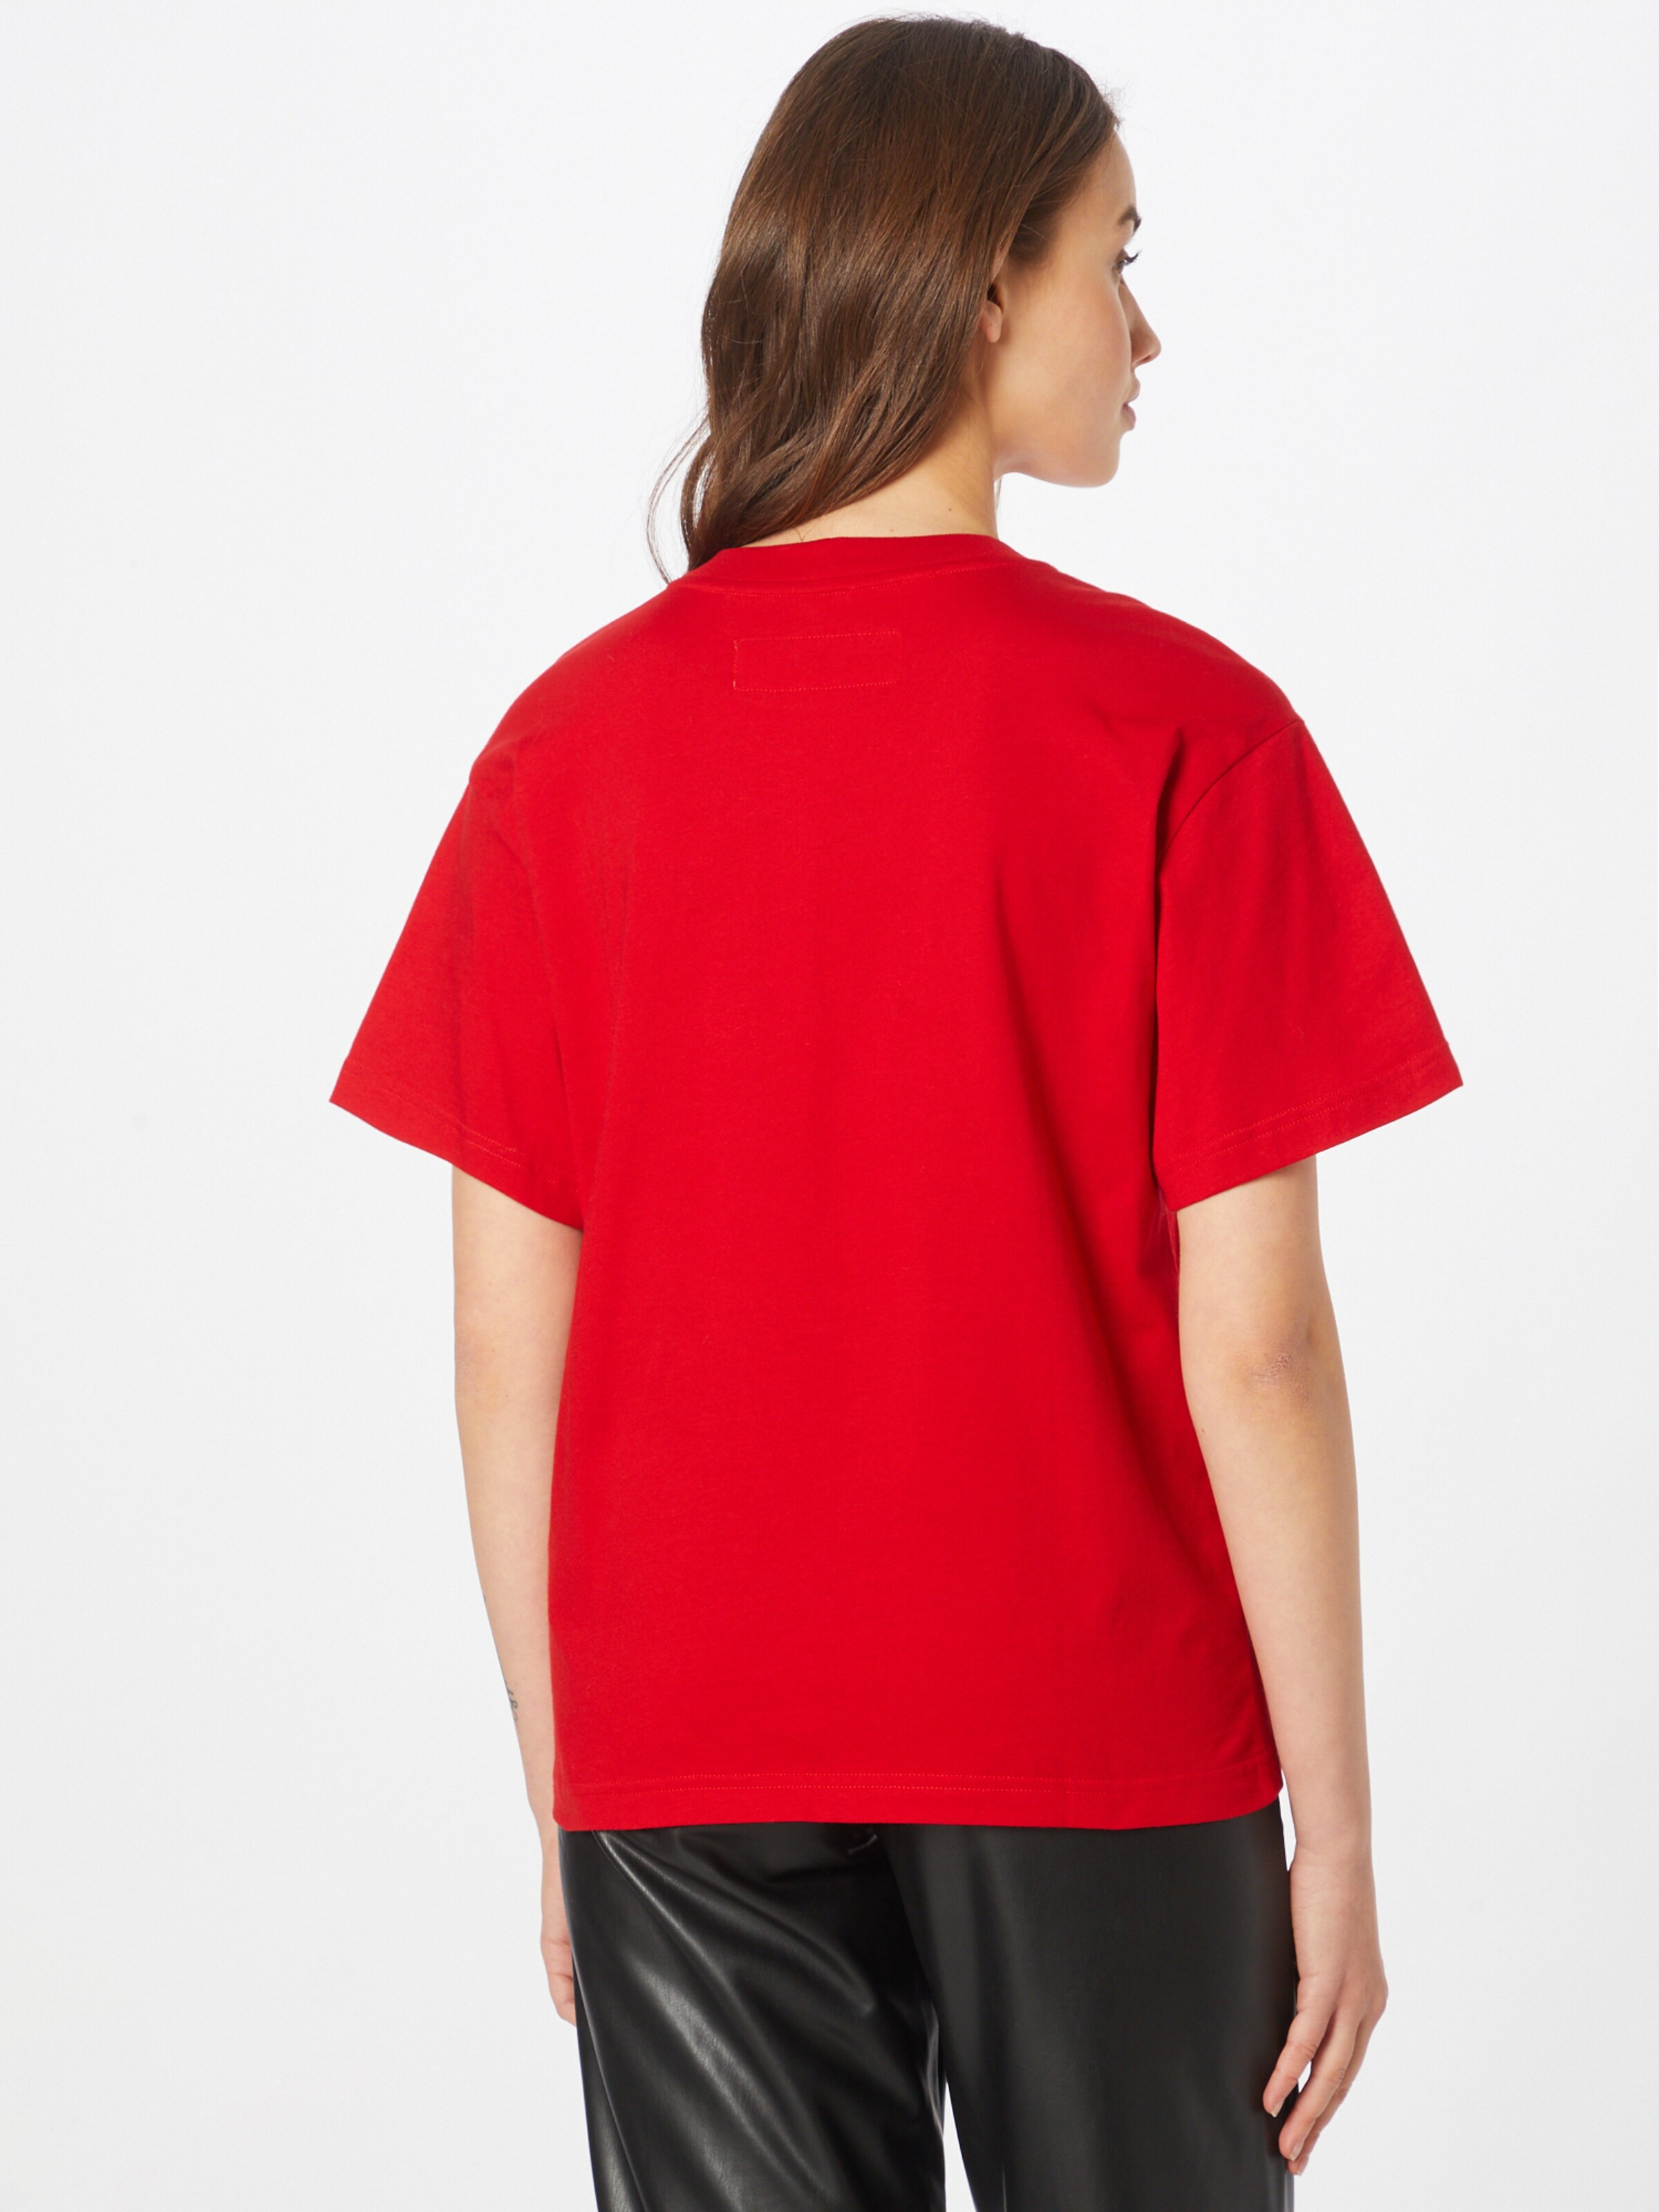 Frauen Shirts & Tops UNITED COLORS OF BENETTON Shirt in Rot - IY92119